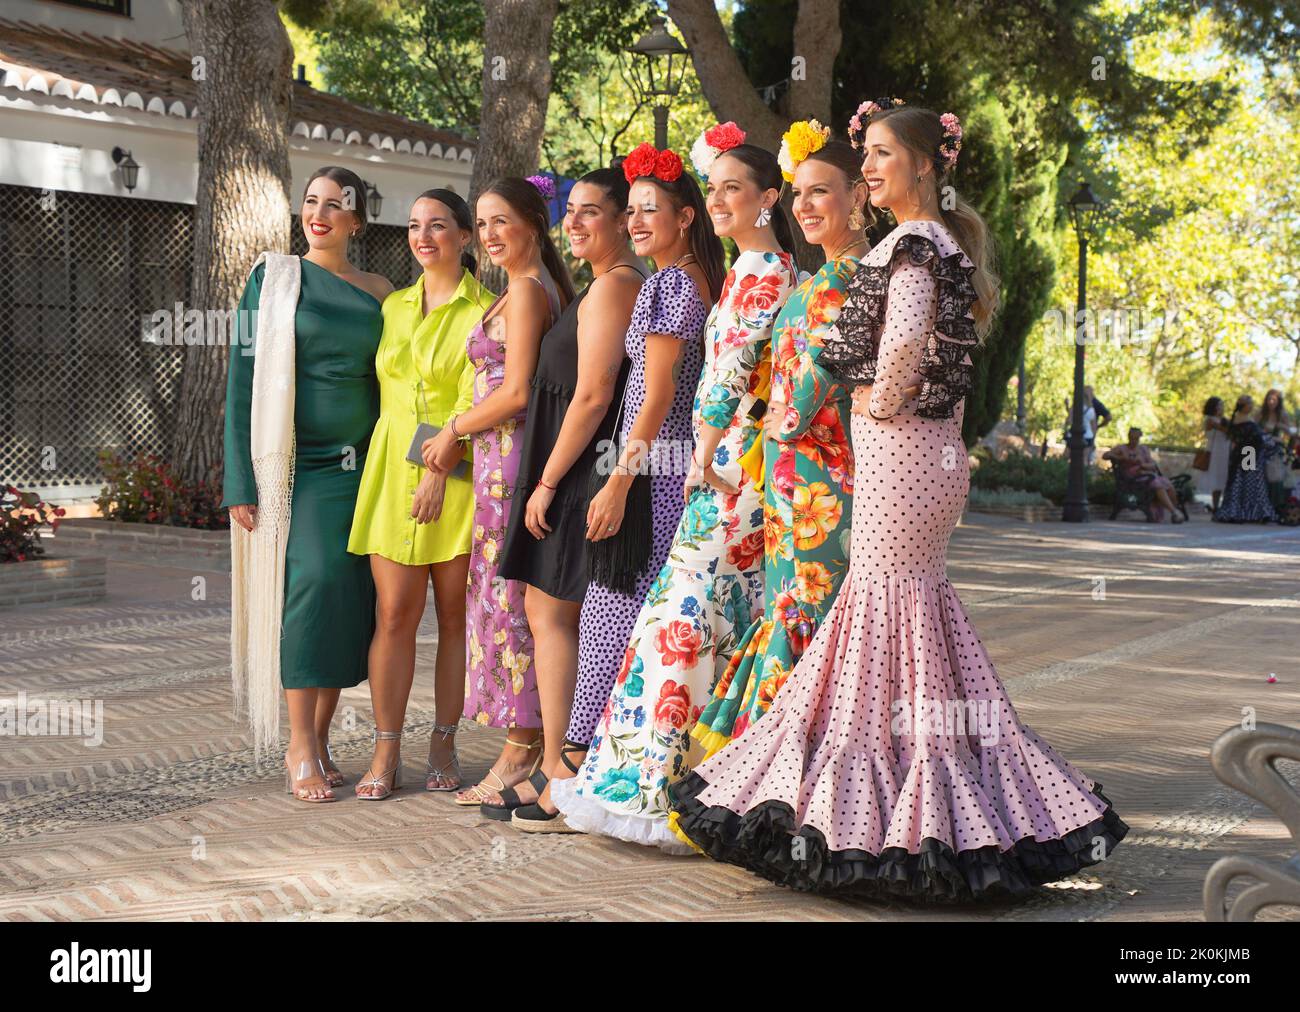 Women dressed in traditional flamenco dress during Feria, of Mijas, Andalucia, Spain. Stock Photo